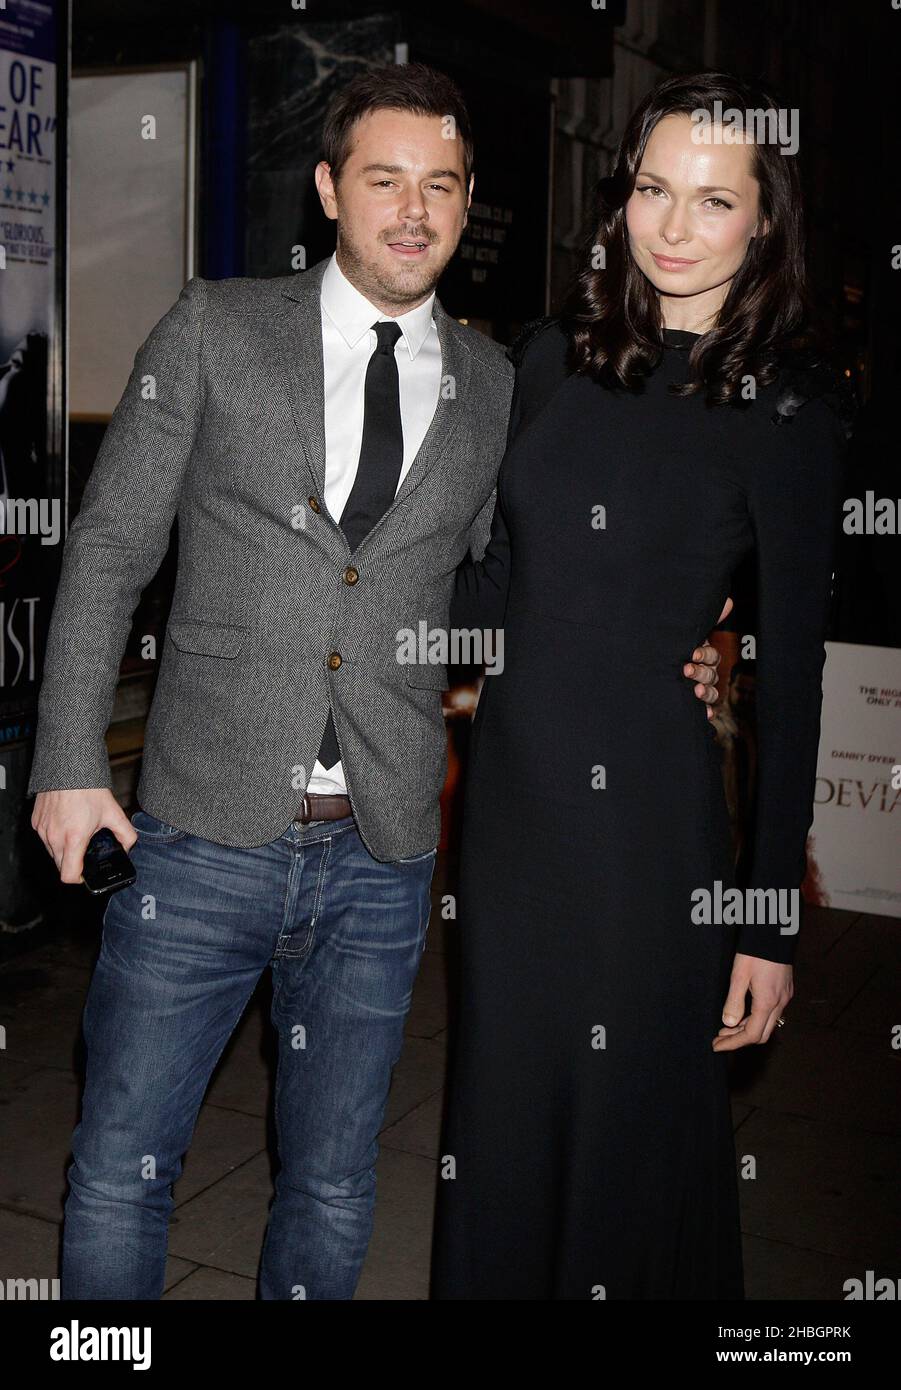 Danny Dyer and Anna Walton attending the world premiere of 'Deviation ...